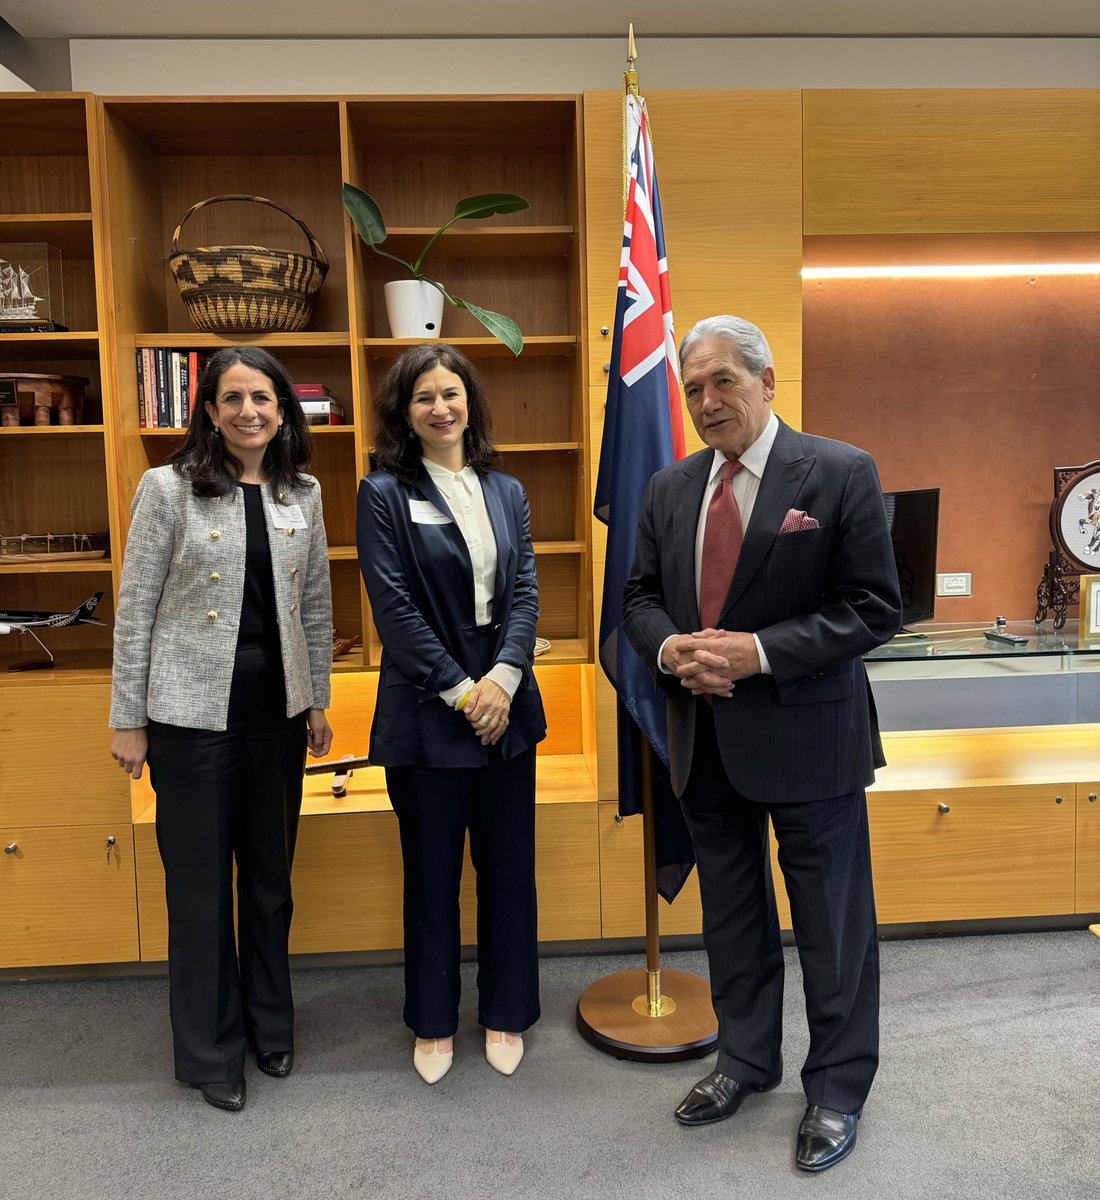 The Foreign Minister met this morning with Juliet Moses & Shoshana Maasland of the NZ Jewish Council. They discussed: -concerns over the rise of anti-semitic incidents in New Zealand -the International Holocaust Remembrance Alliance; and -the situation in the Middle East.